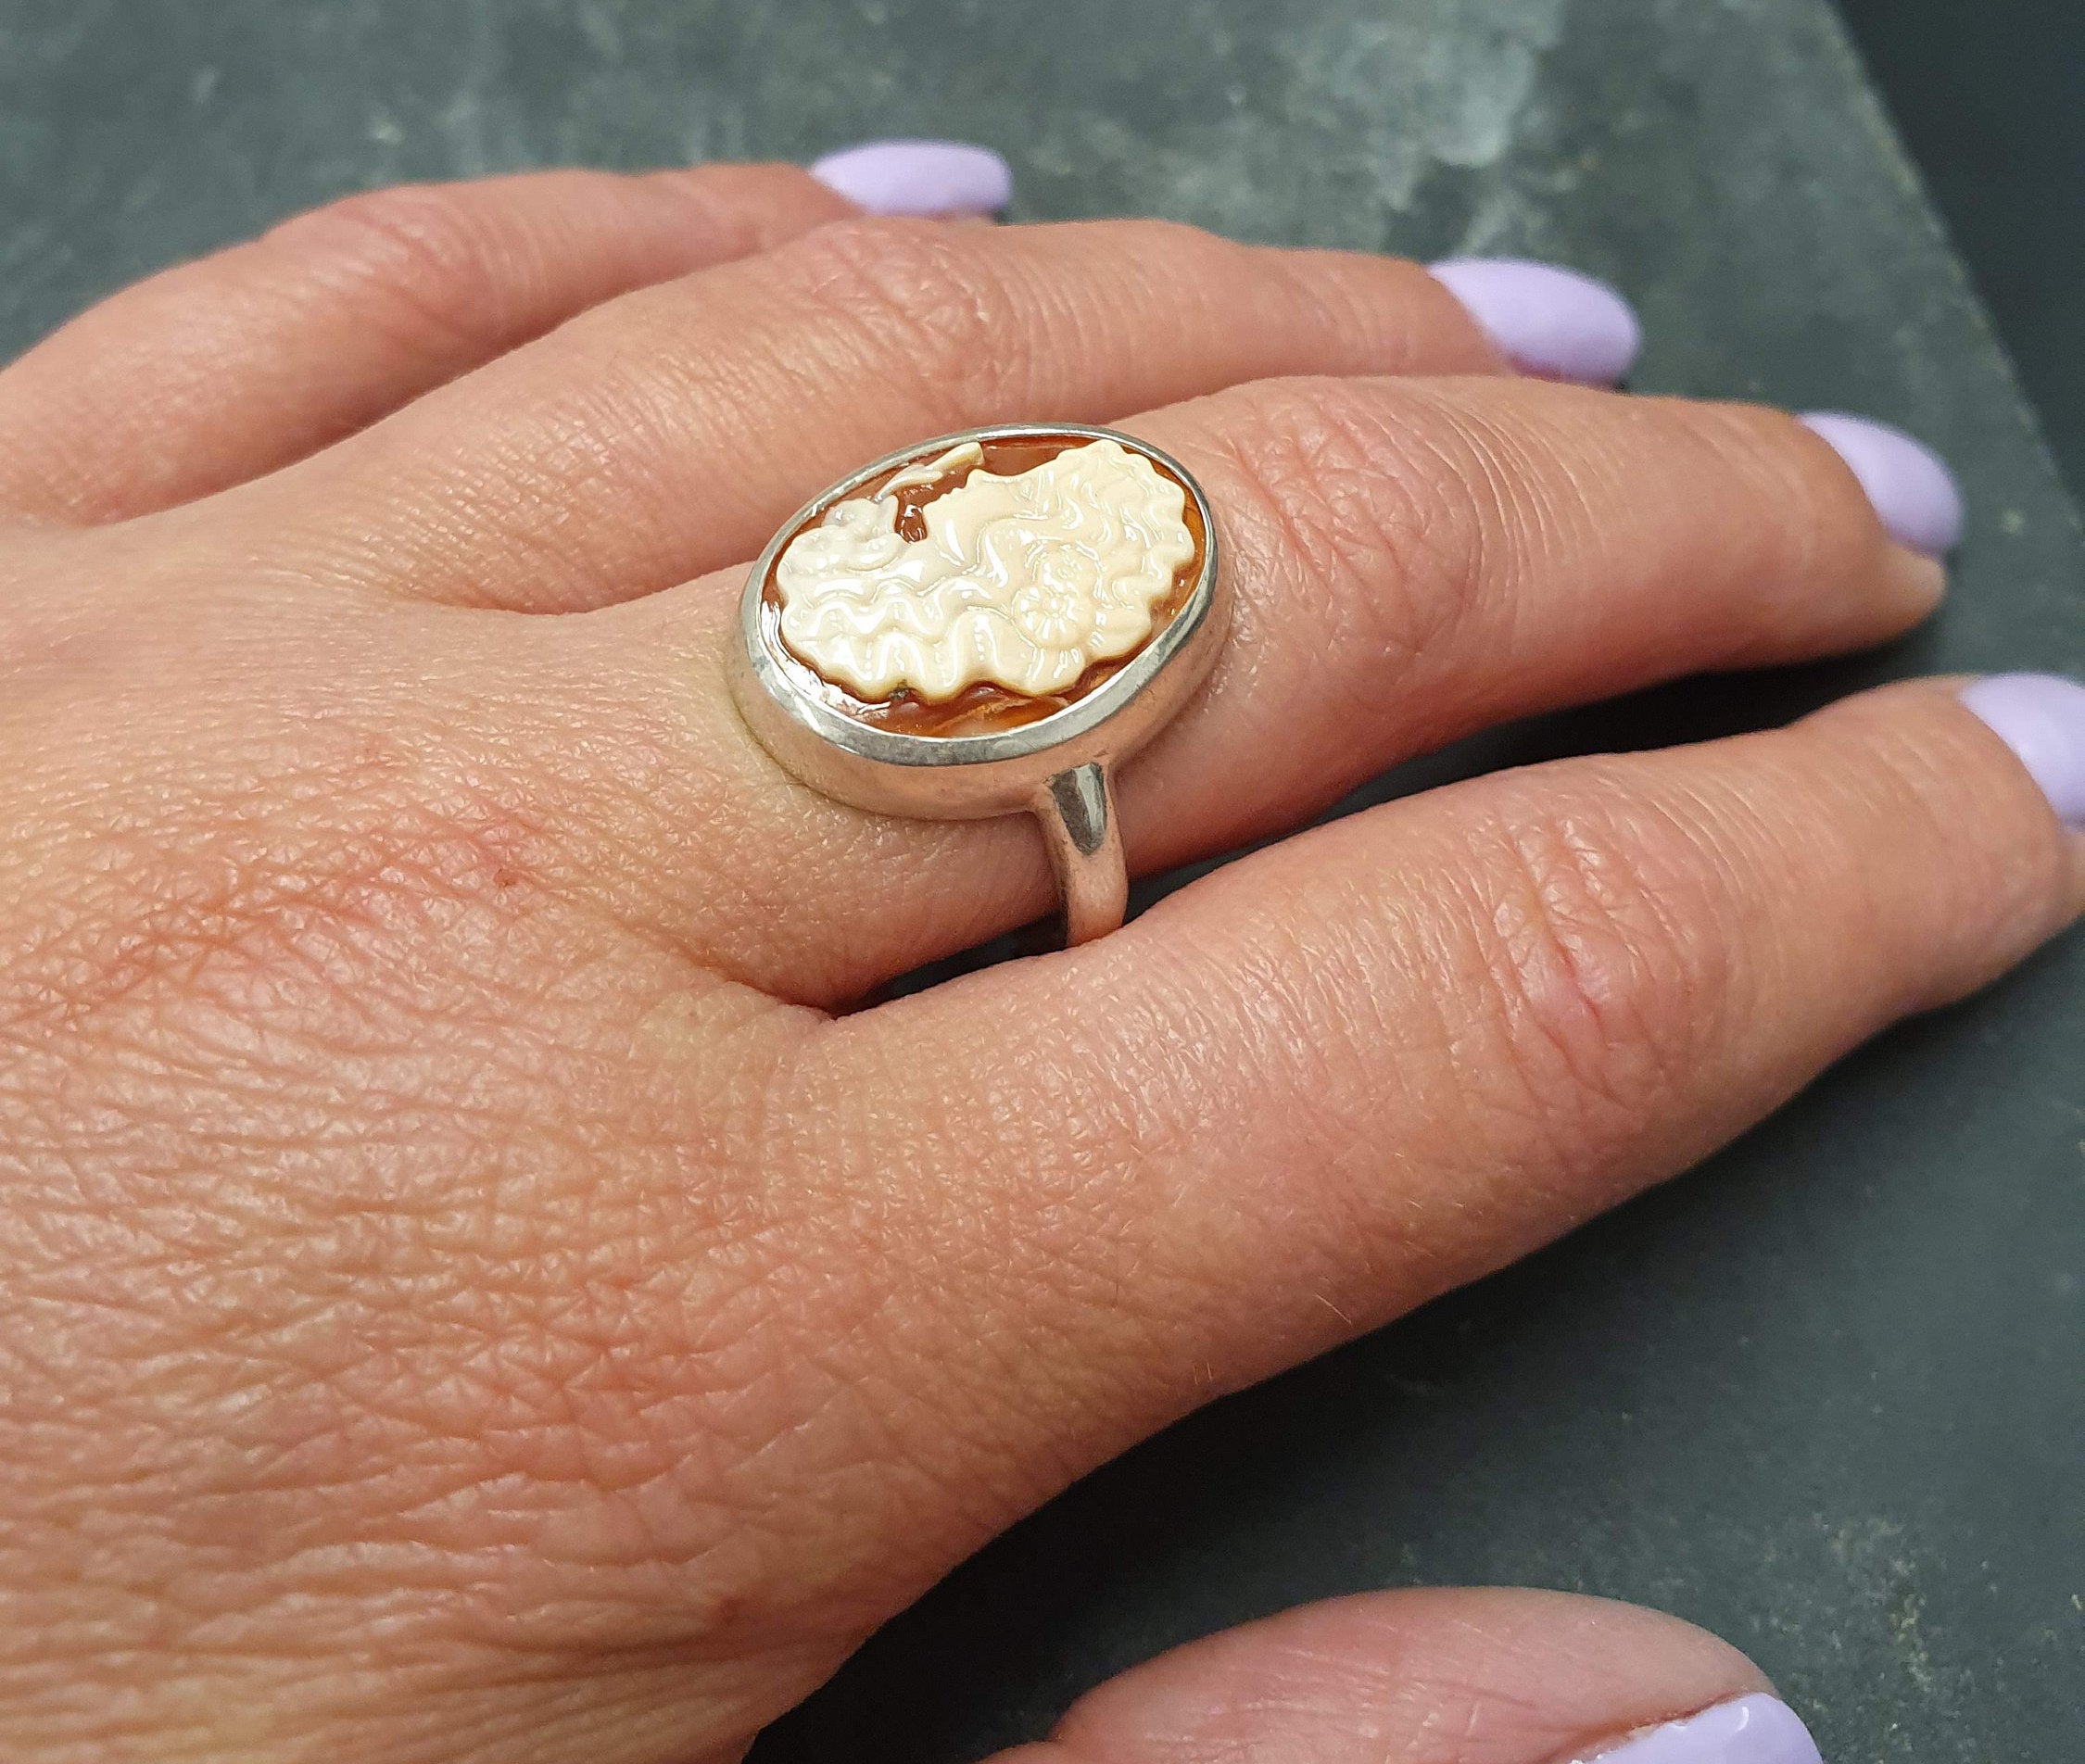 Lady Cameo Ring, Carved Ring, Roman Ring, Red Ring, Statement Ring, Oval Ring, Orange Ring, Vintage Ring, Solid Silver Ring, Mother of Pearl